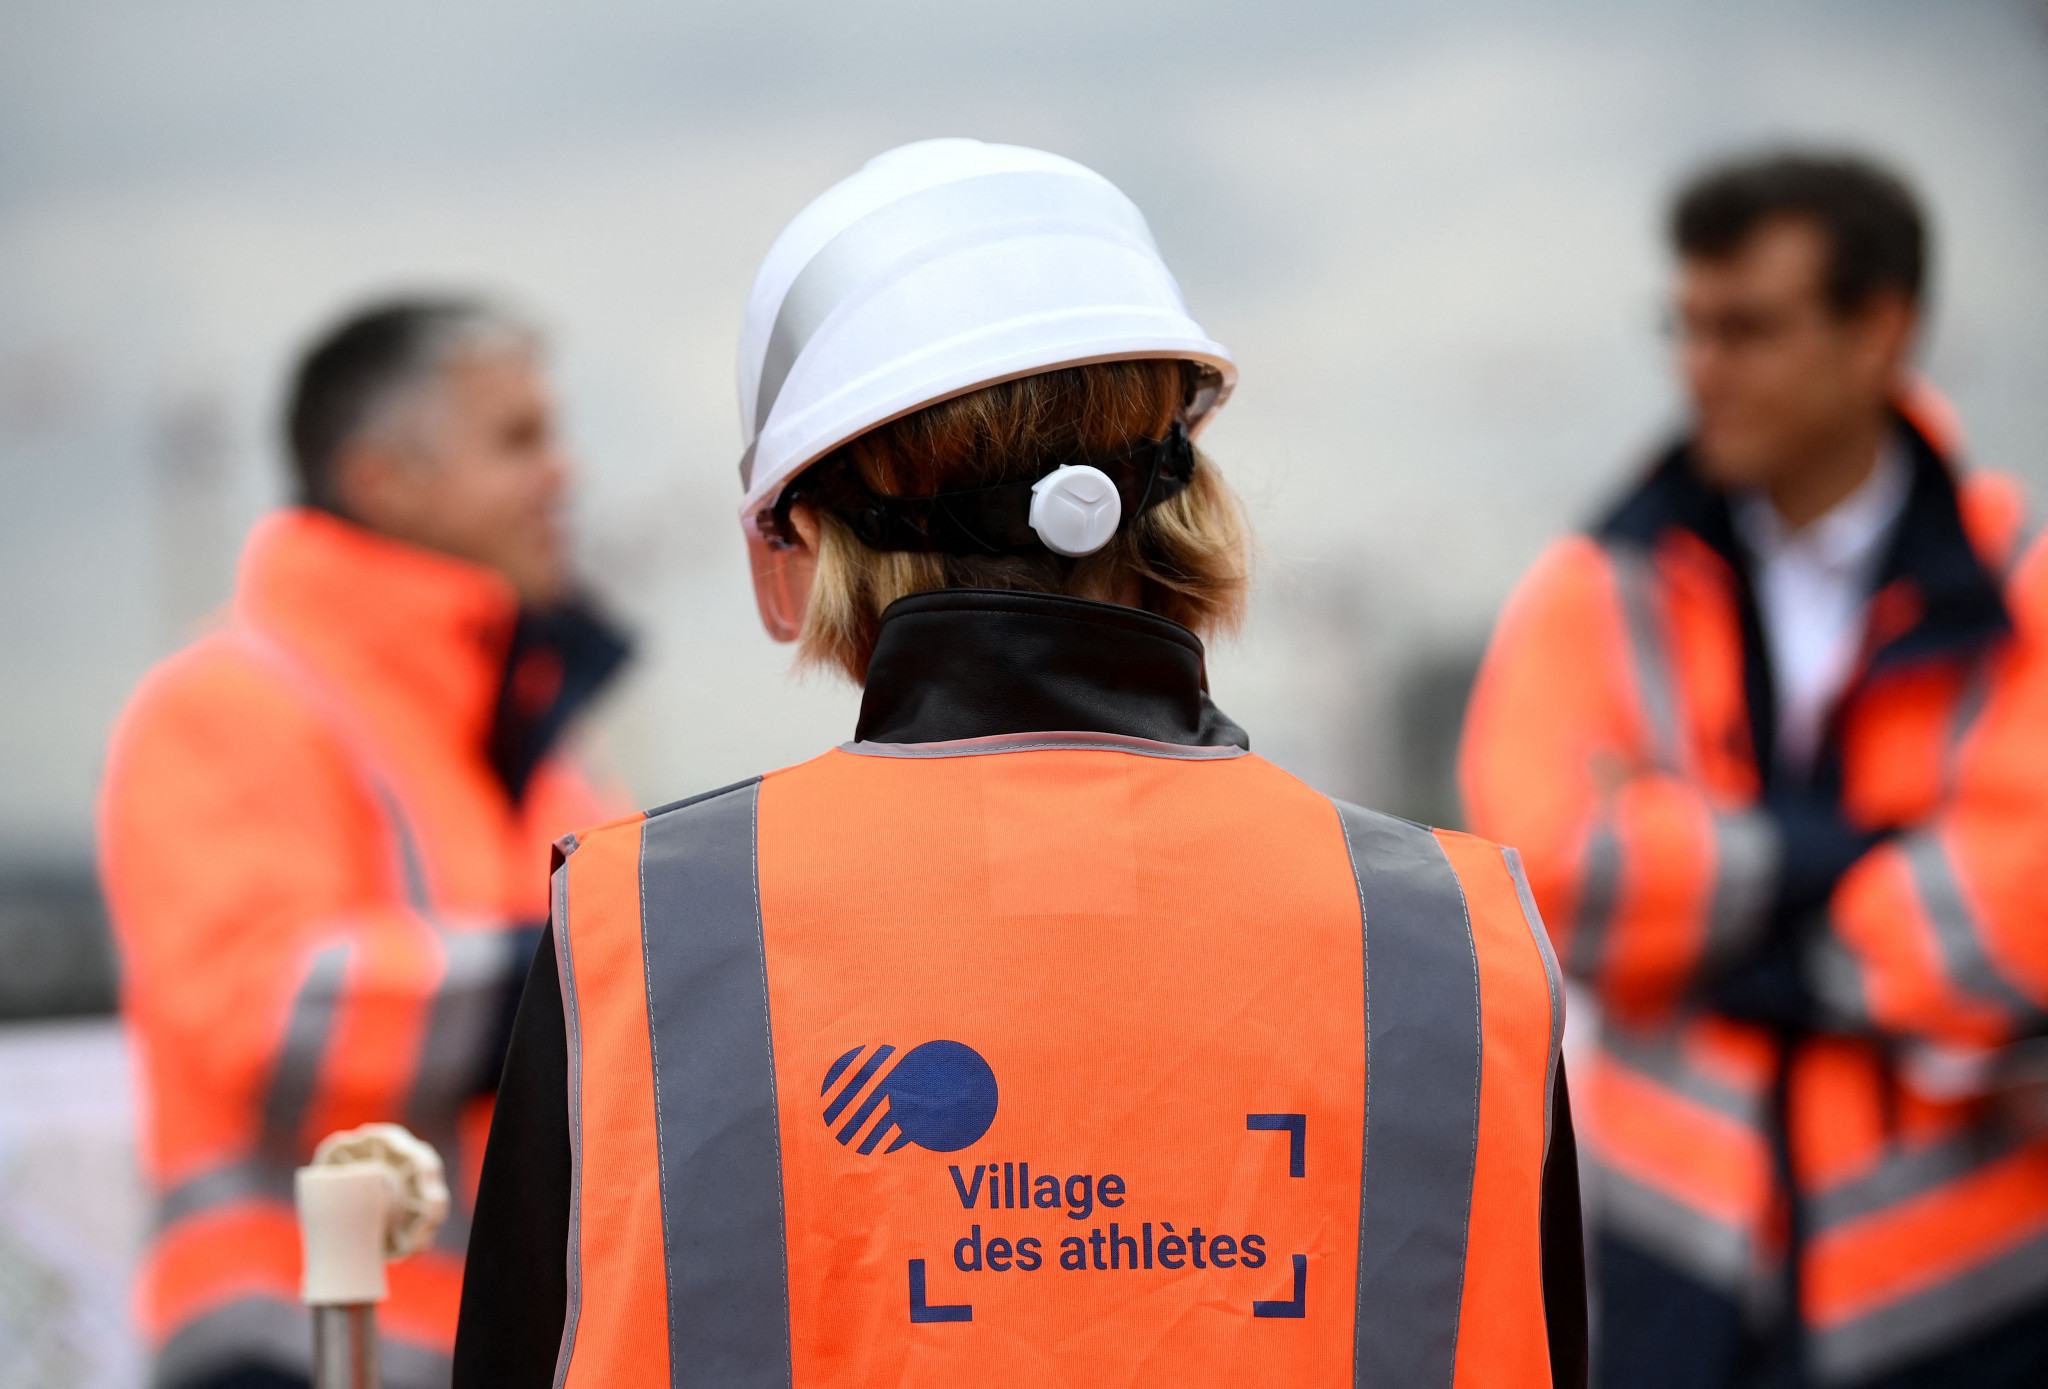 Solideo takes on five new projects prior to Paris 2024 Olympic Games